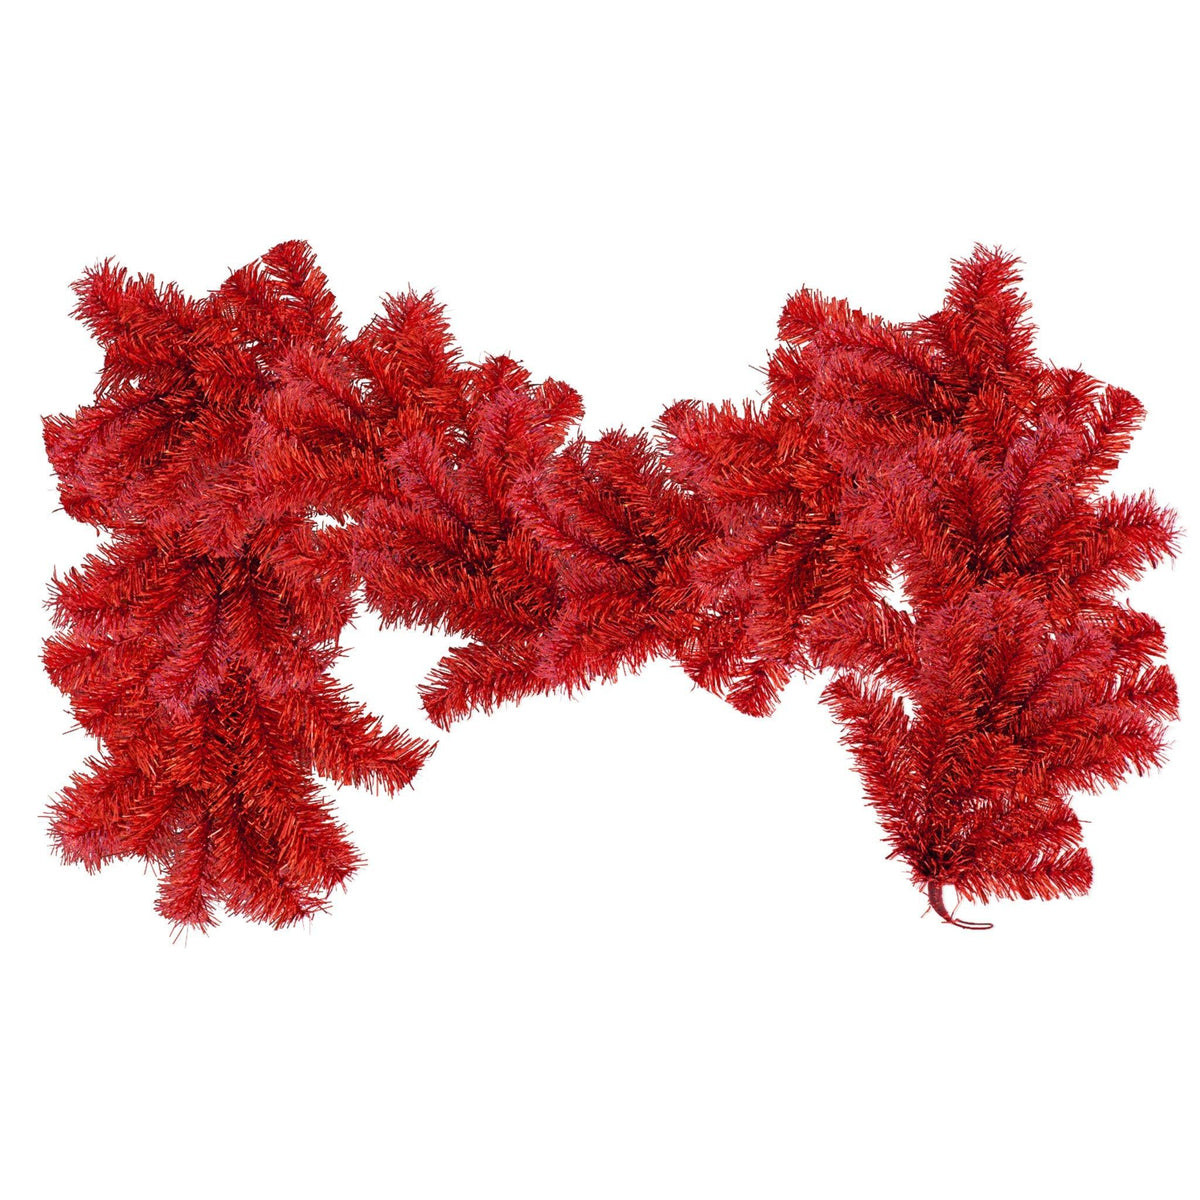 Shop for Lee Display's brand new 6FT Shiny Metallic Red Tinsel Brush Garlands on sale now at leedisplay.com.  